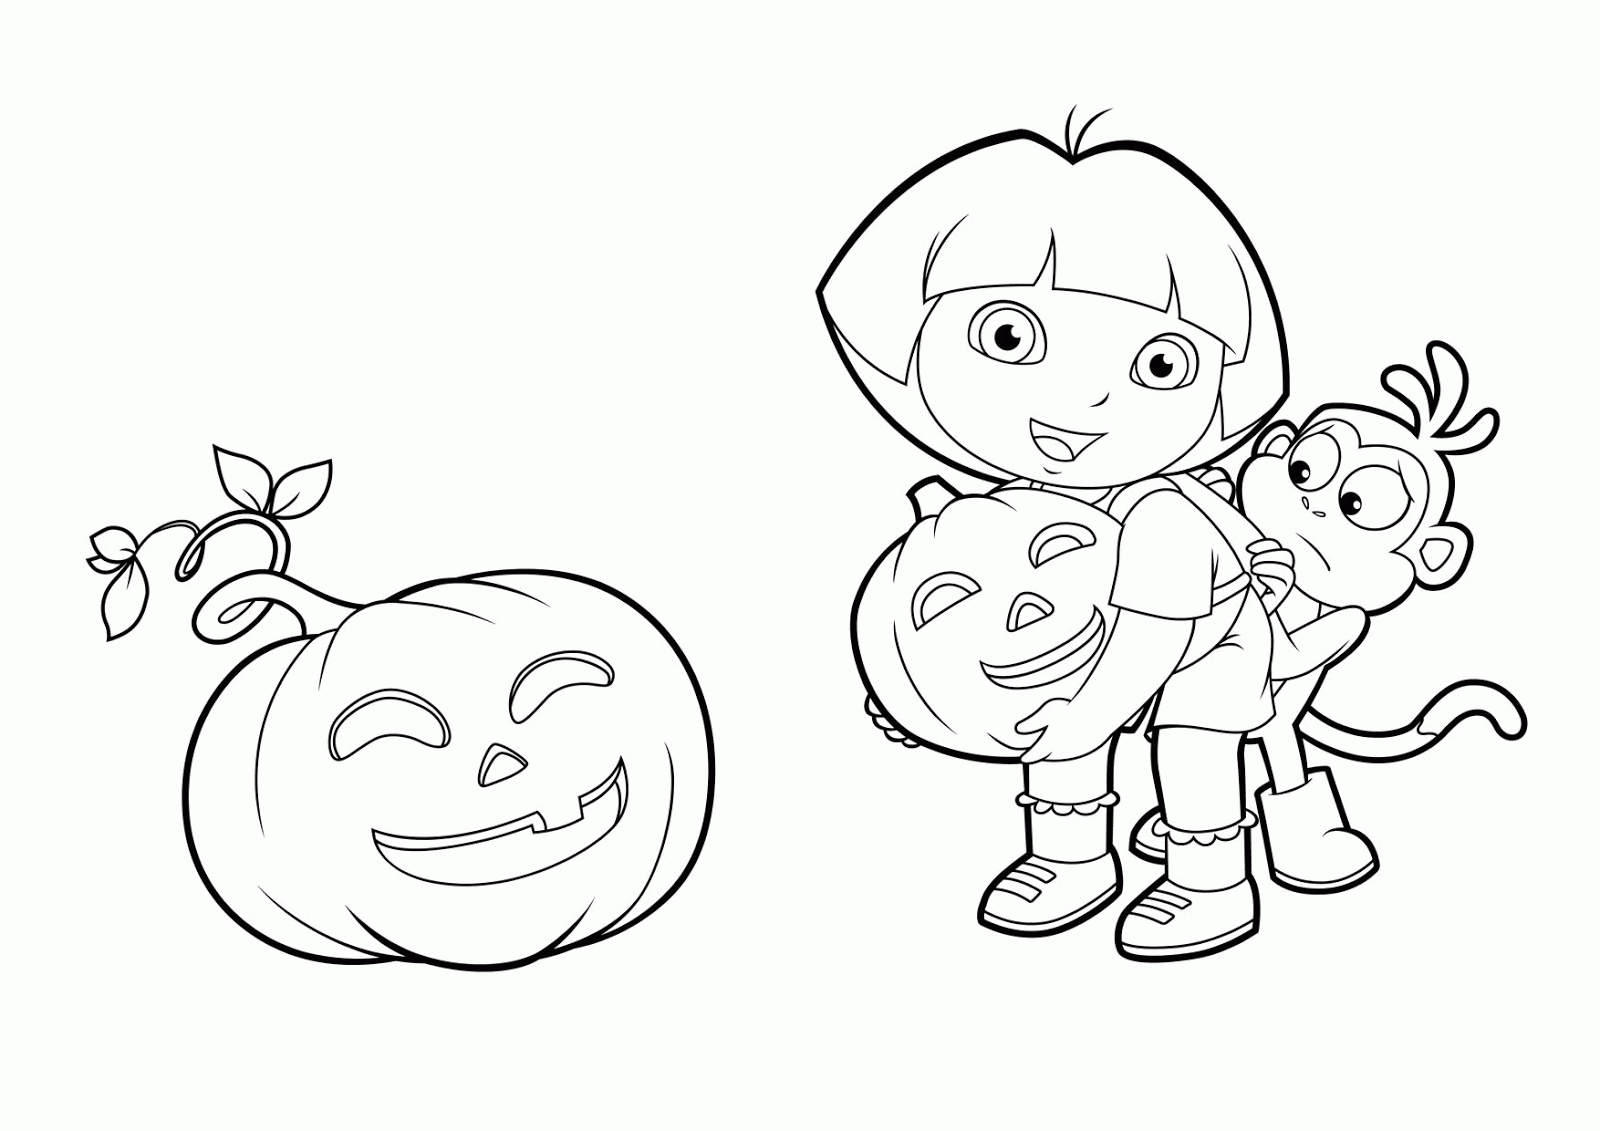 Dora And Boots Coloring Page Free wallpaper